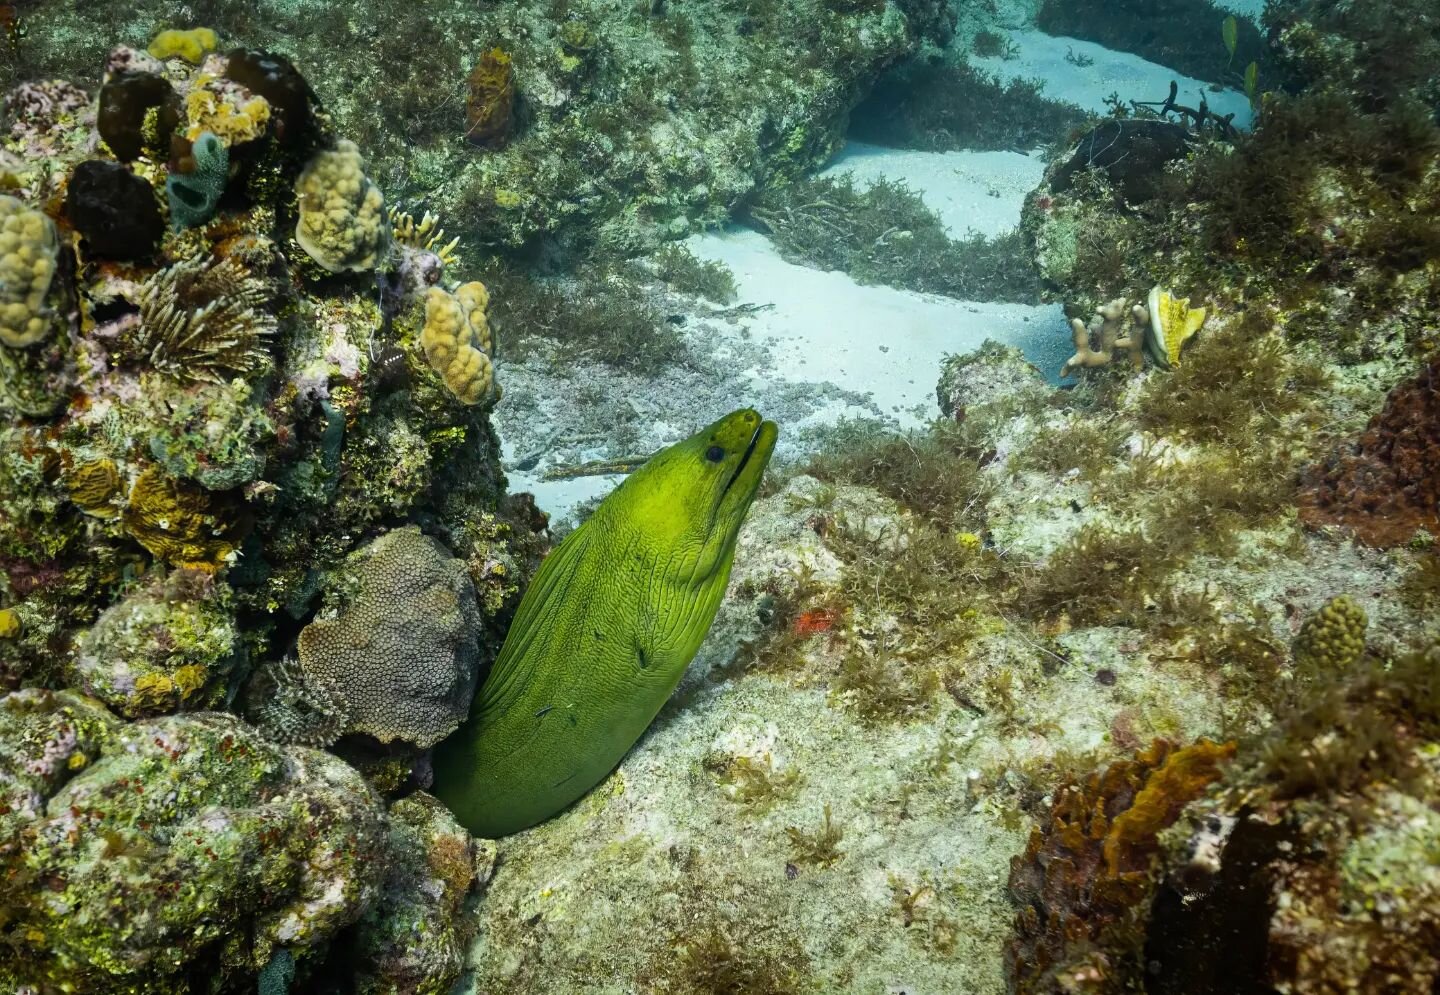 Moray eels are so cool and creepy. The green color actually comes from a slime covering the body. Awesome creatures to check out.

#freediving #stx #stcroix #underwatephotography #reeflife #nikonz6 #moray #eel #morayeel #usvi #gotostcroix